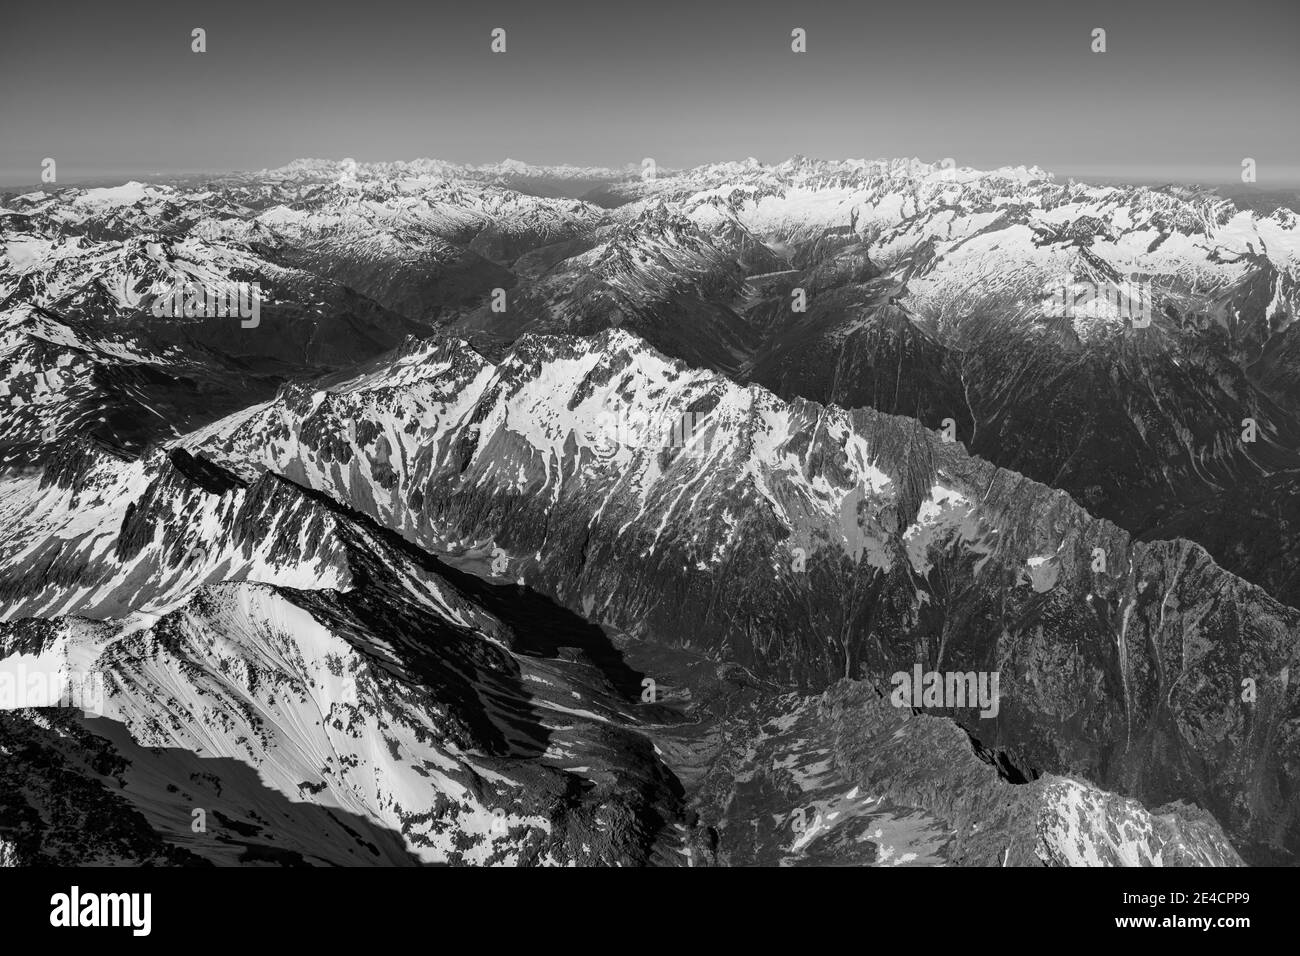 Switzerland, view from the Glarus Alps to the Valais Alps and the Bernese Alps Stock Photo